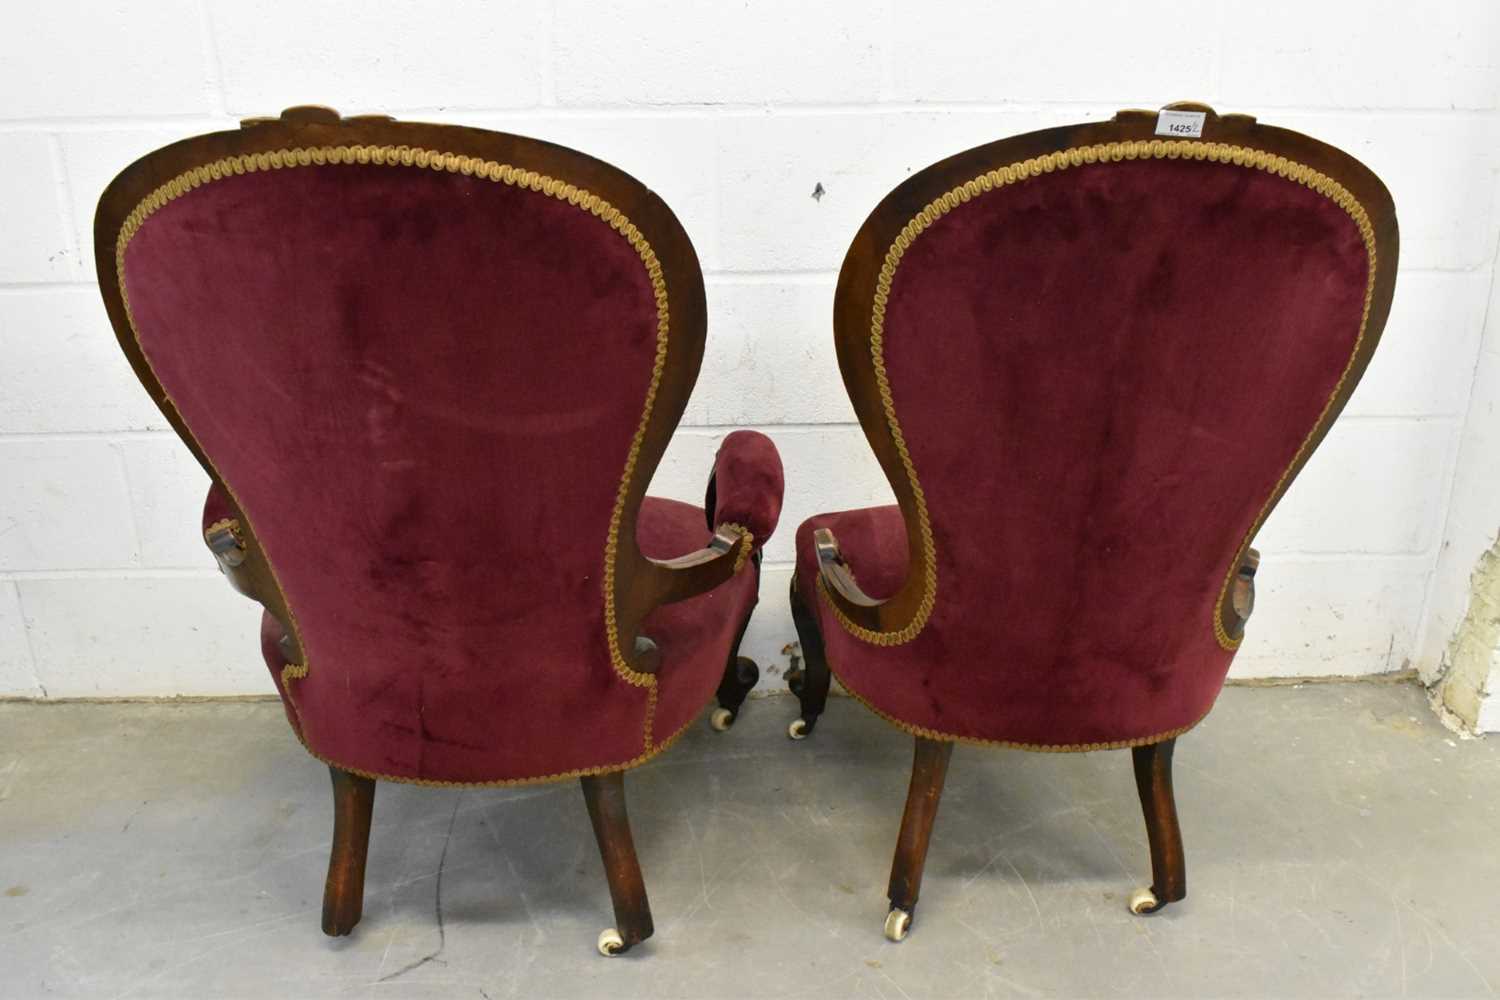 Pair of mid Victorian his and hers upholstered easy chairs - Image 5 of 5